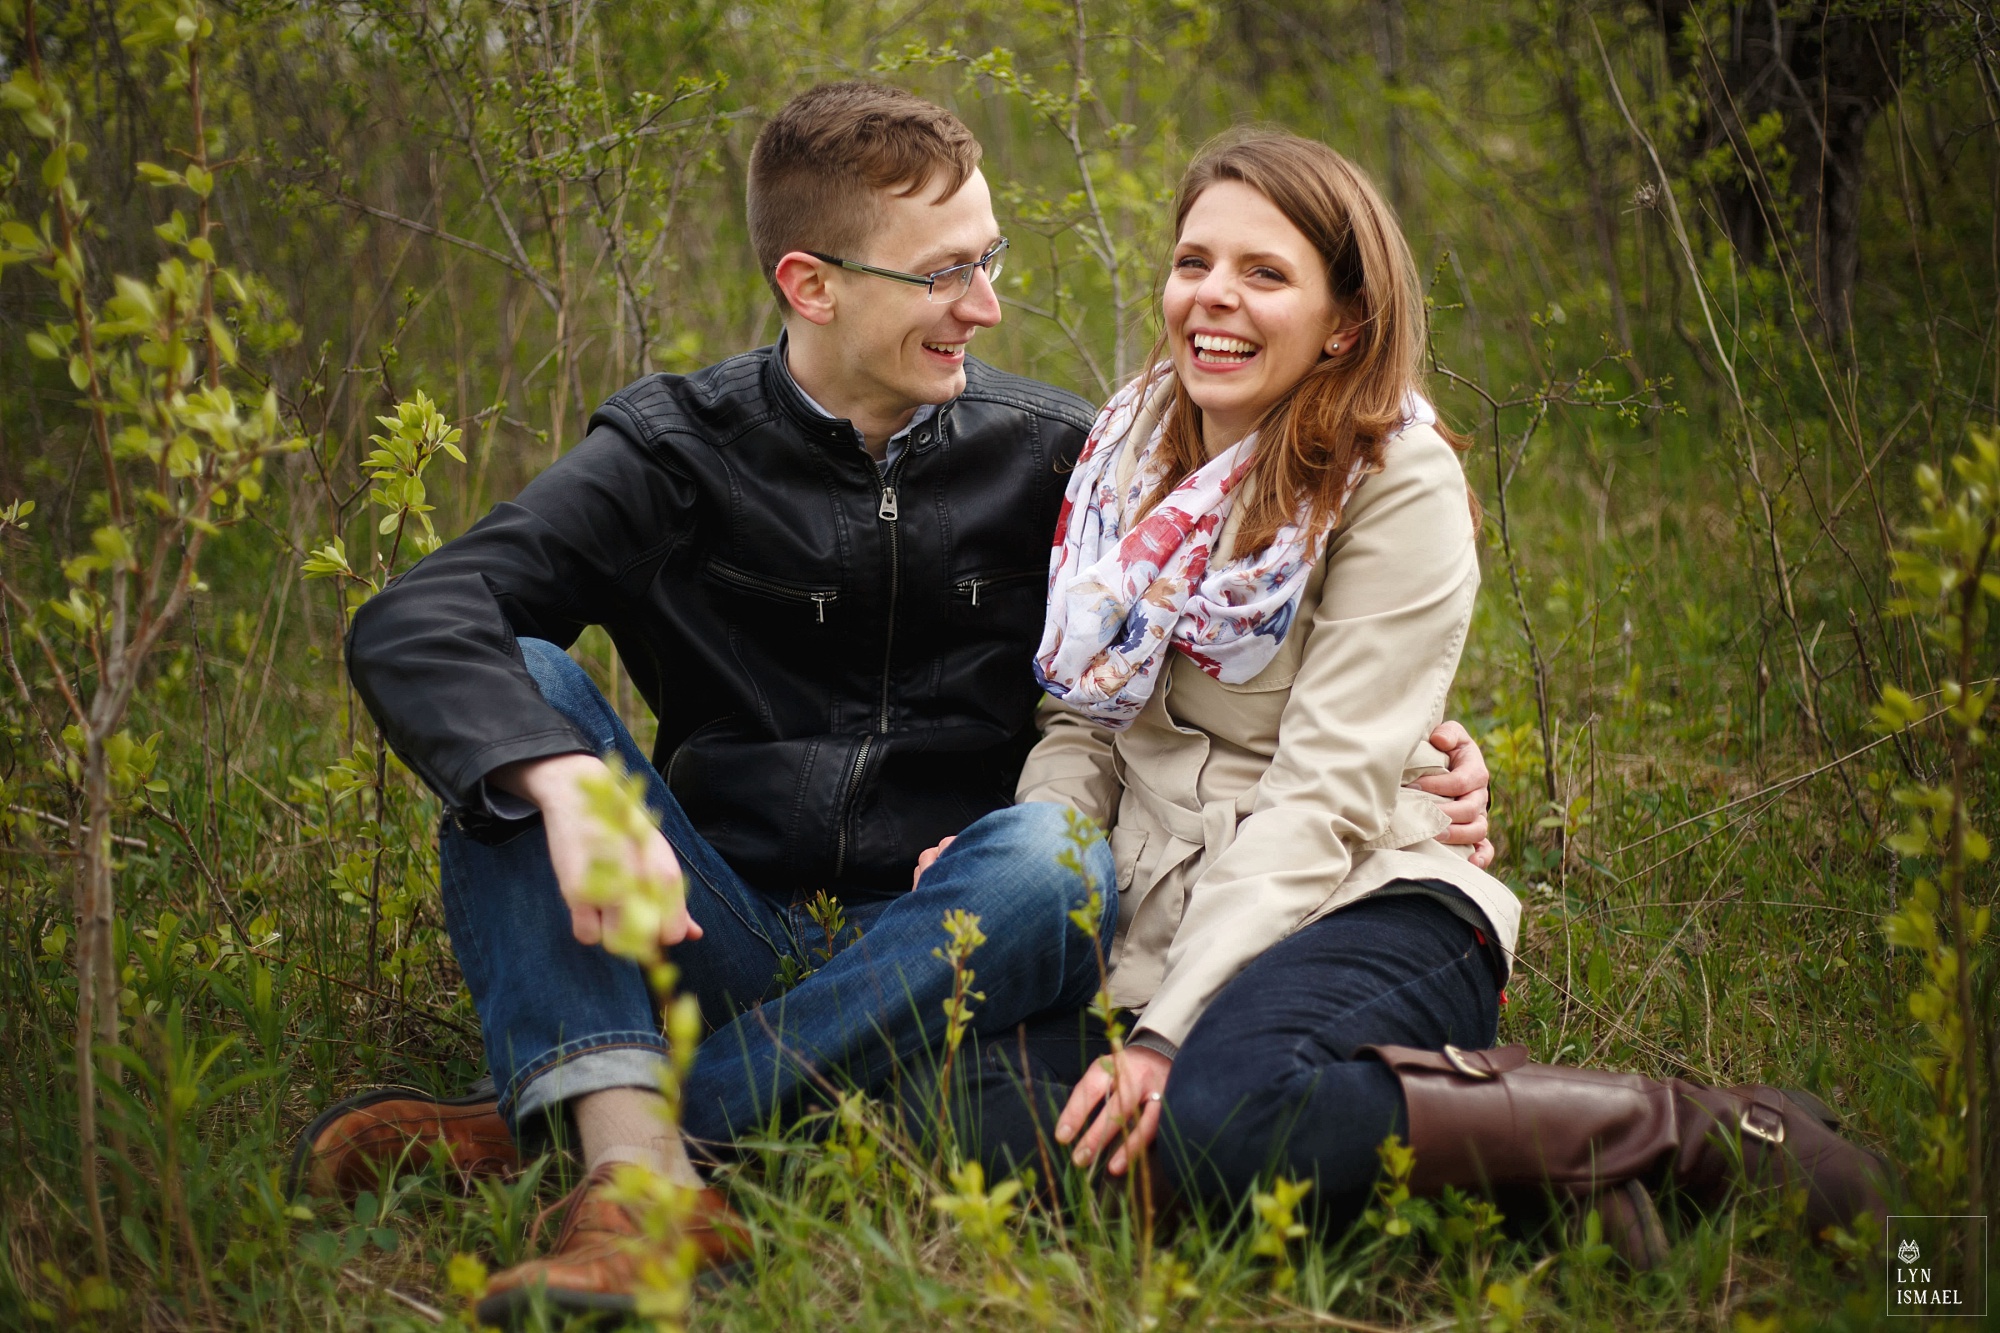 An engaged couple in Kitchener having fun during their engagement session